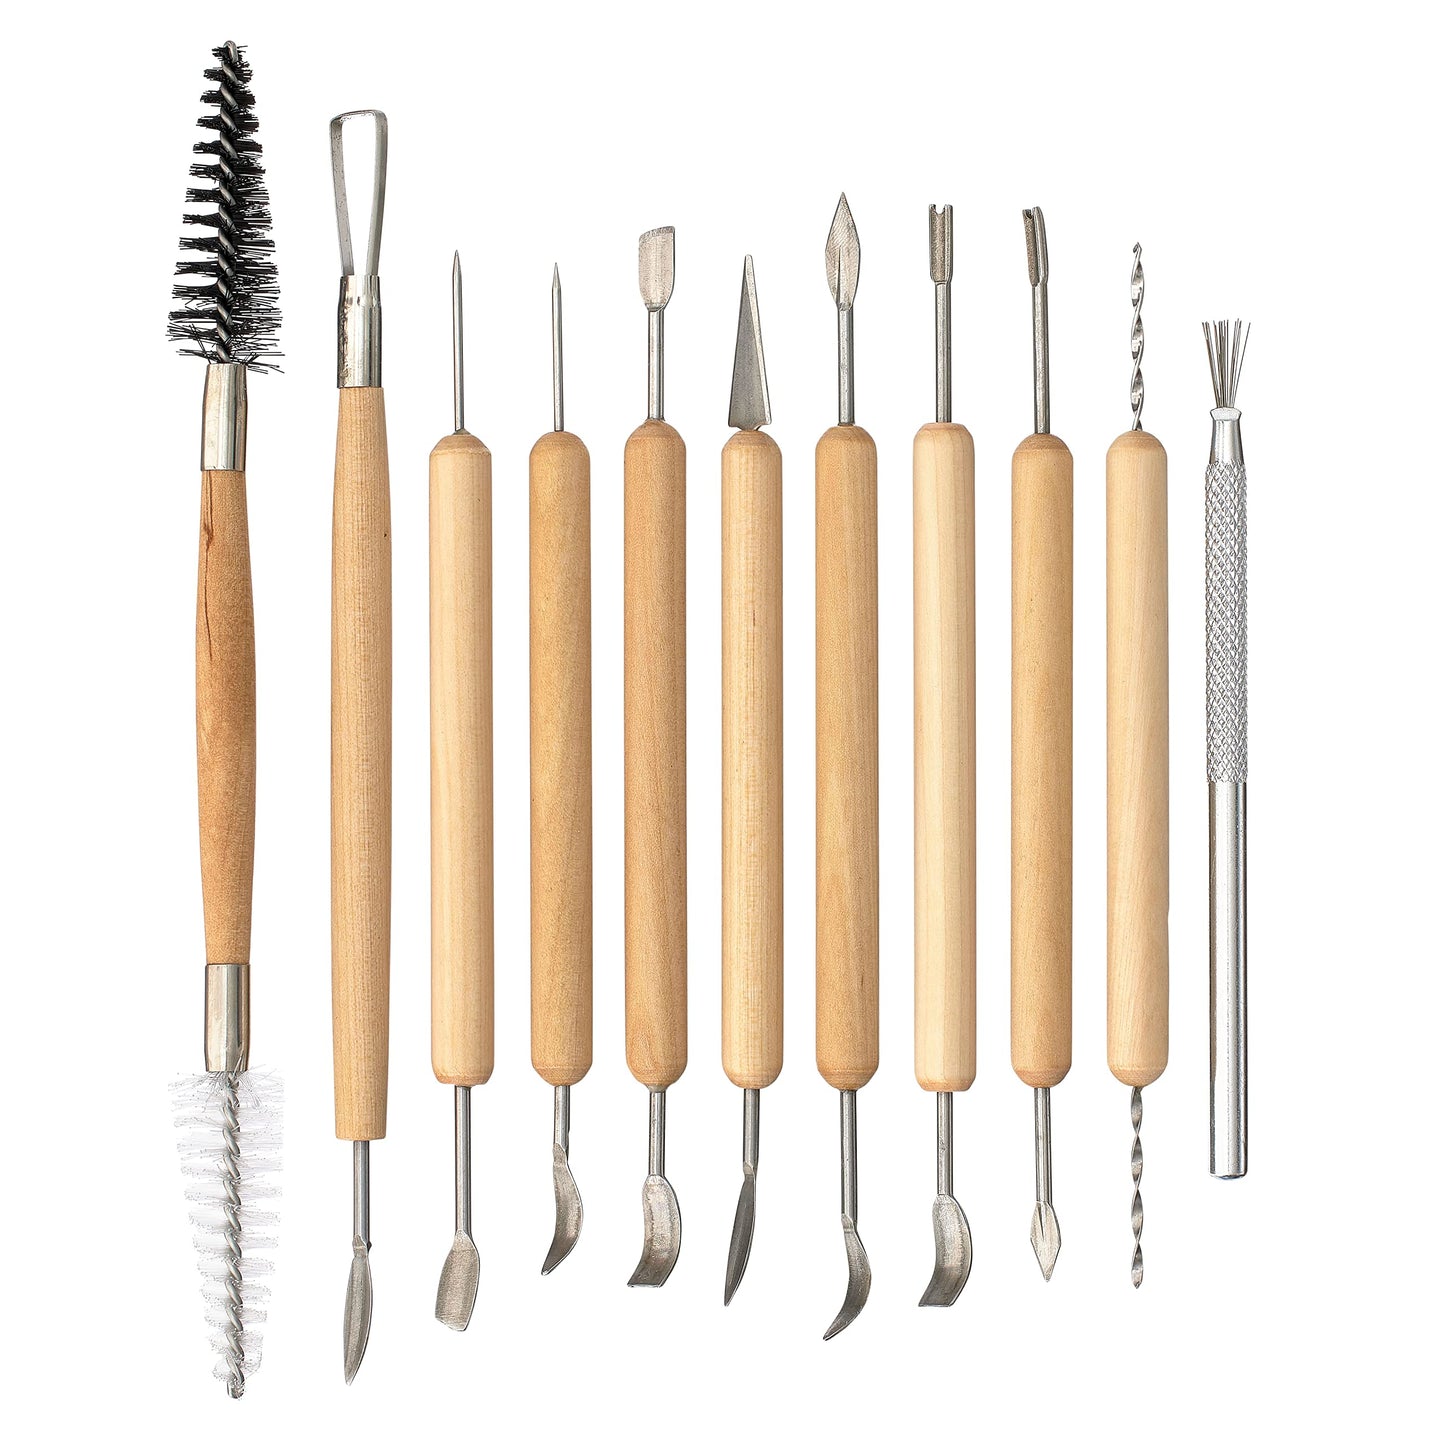 6 Pack: Embossing Stylus Tool Set by Craft Smart